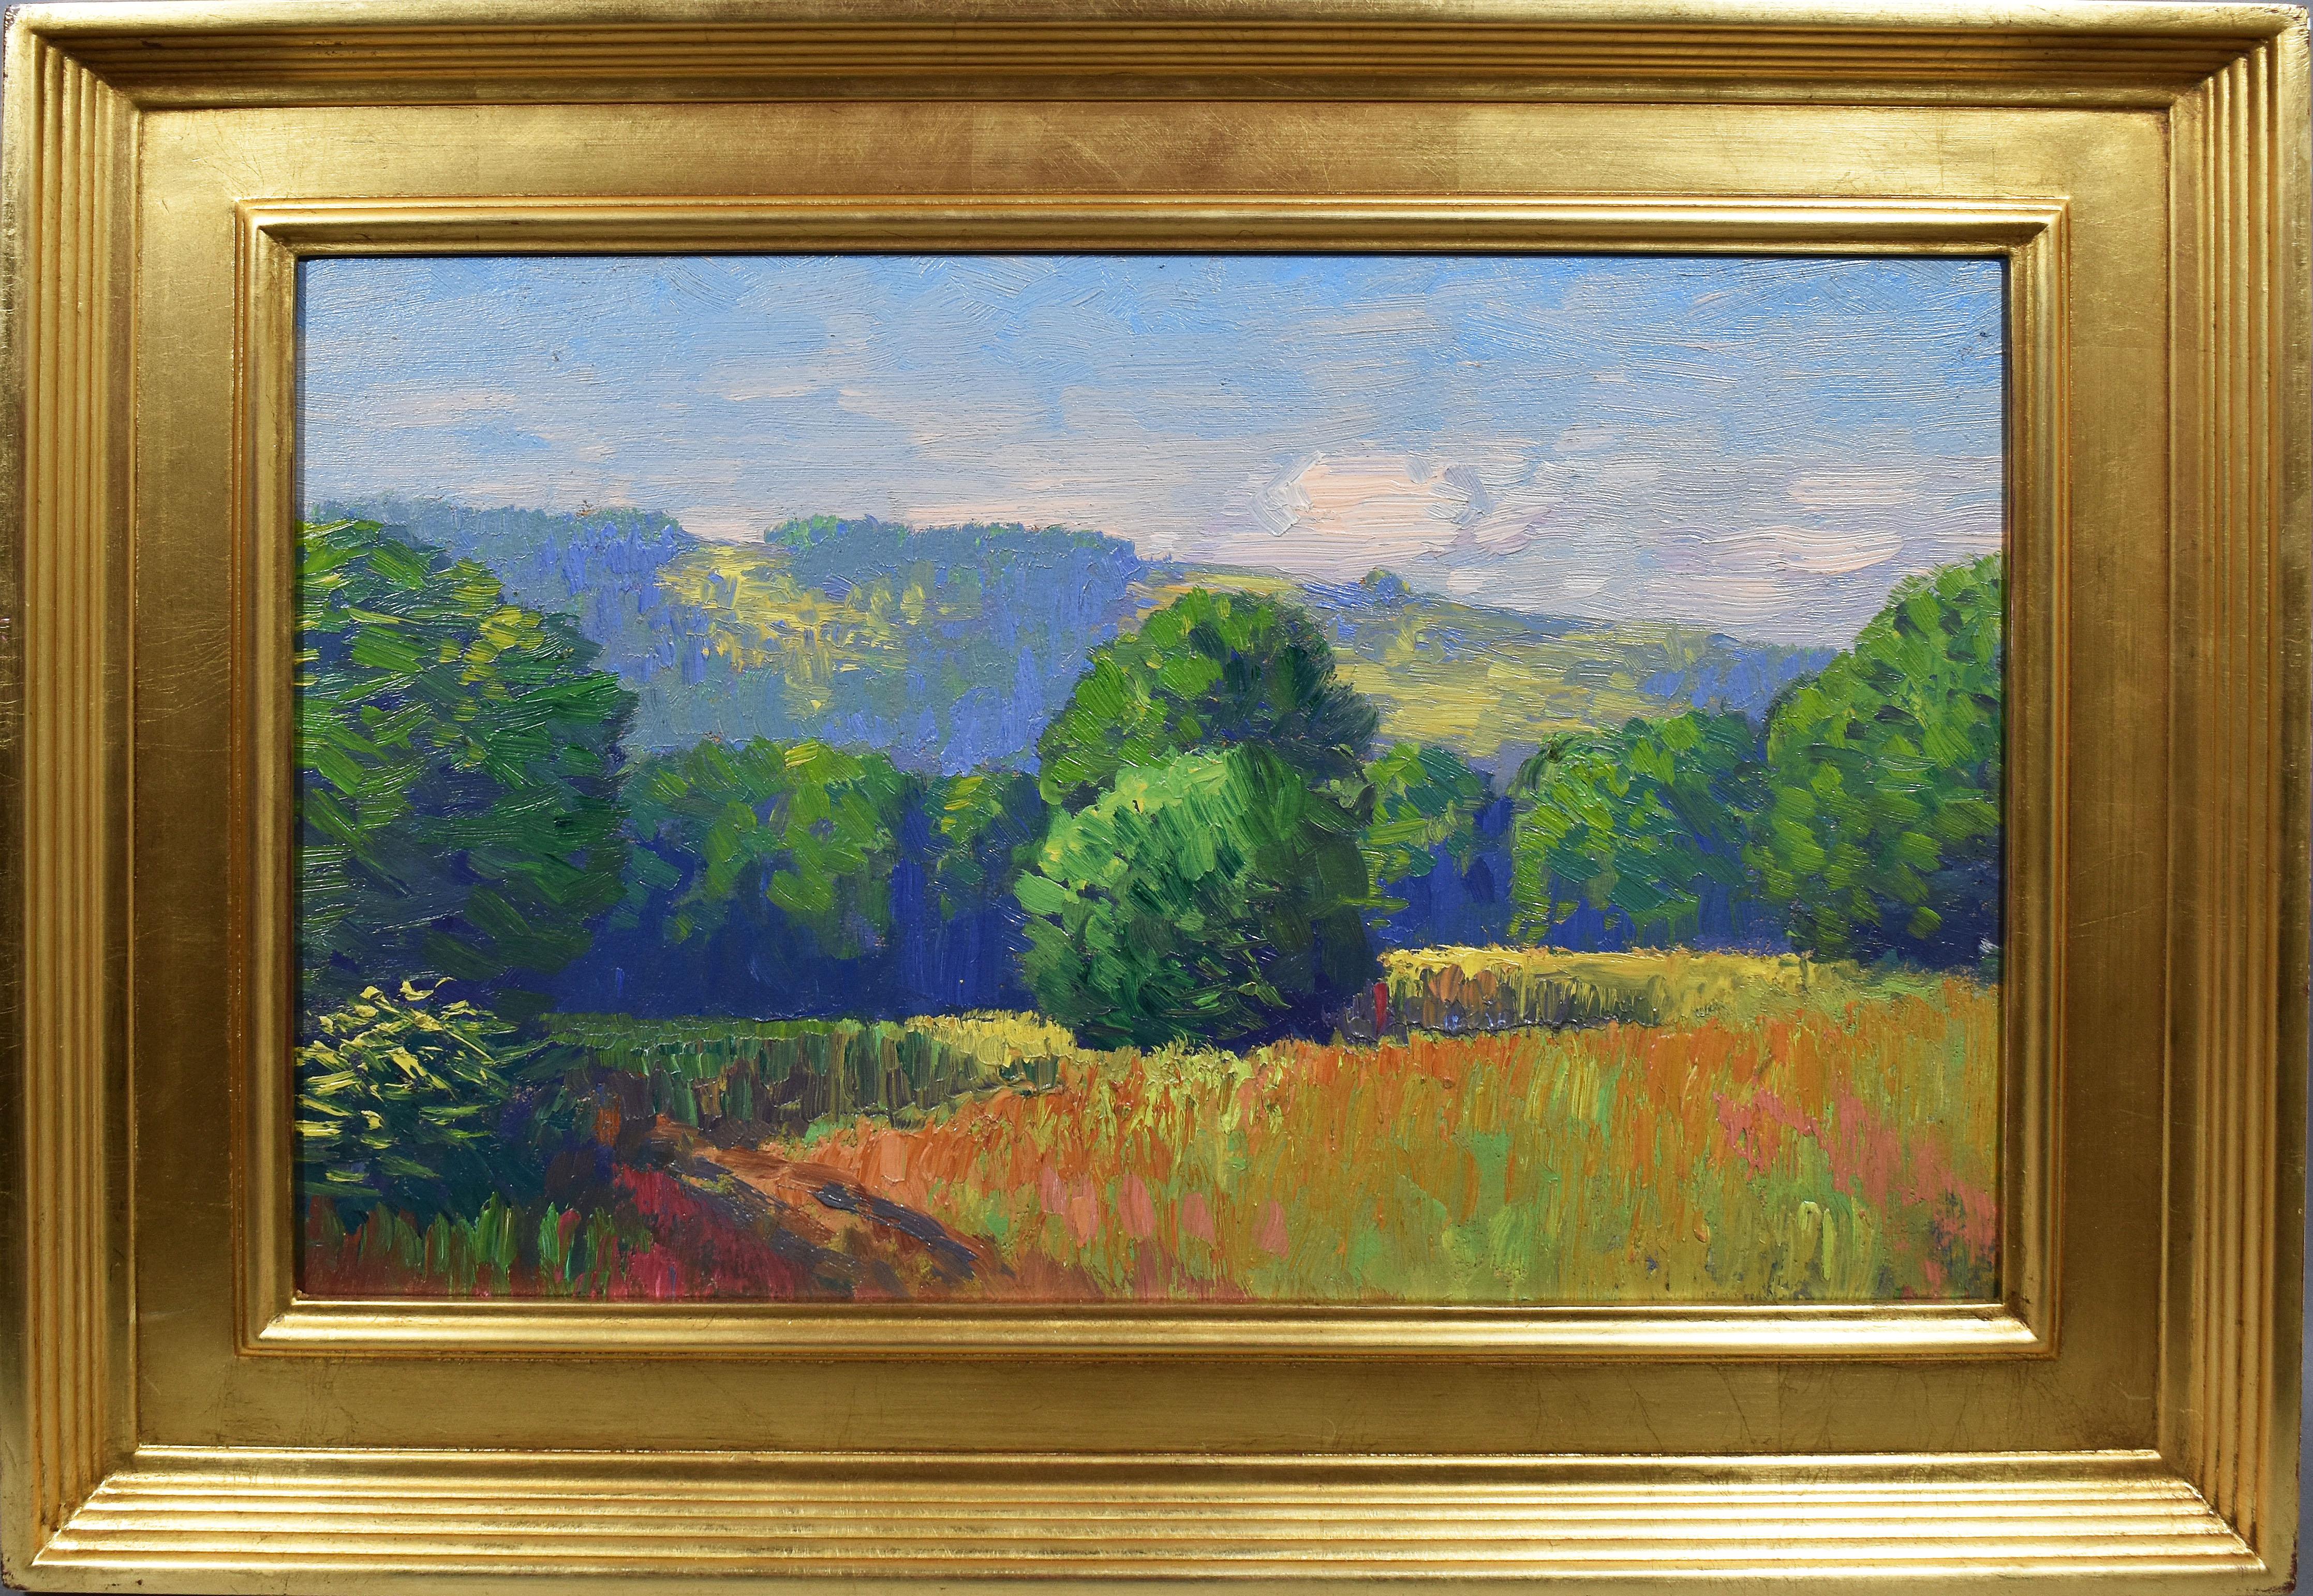 Will Hutchins Landscape Painting - Antique American Impressionist Wild Flower Panoramic Landscape Summer Painting